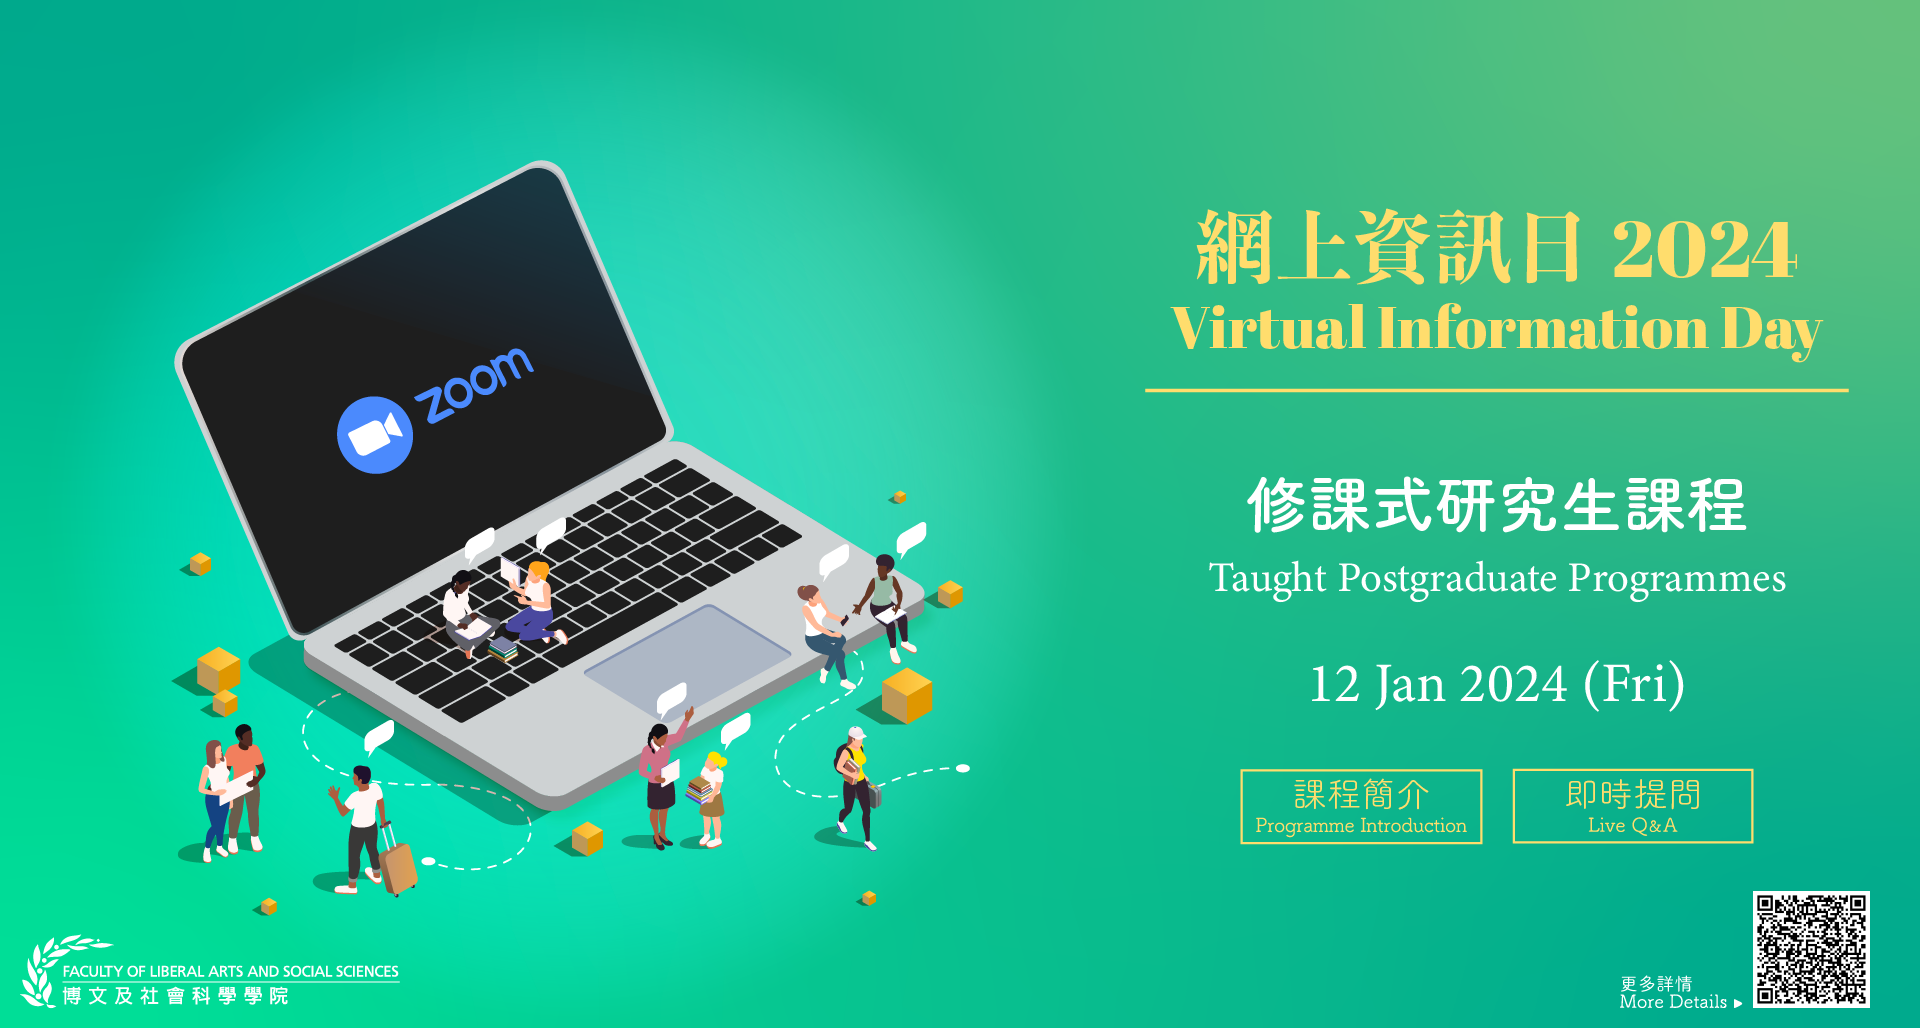 Faculty of Liberal Arts and Social Sciences Virtual Information Day